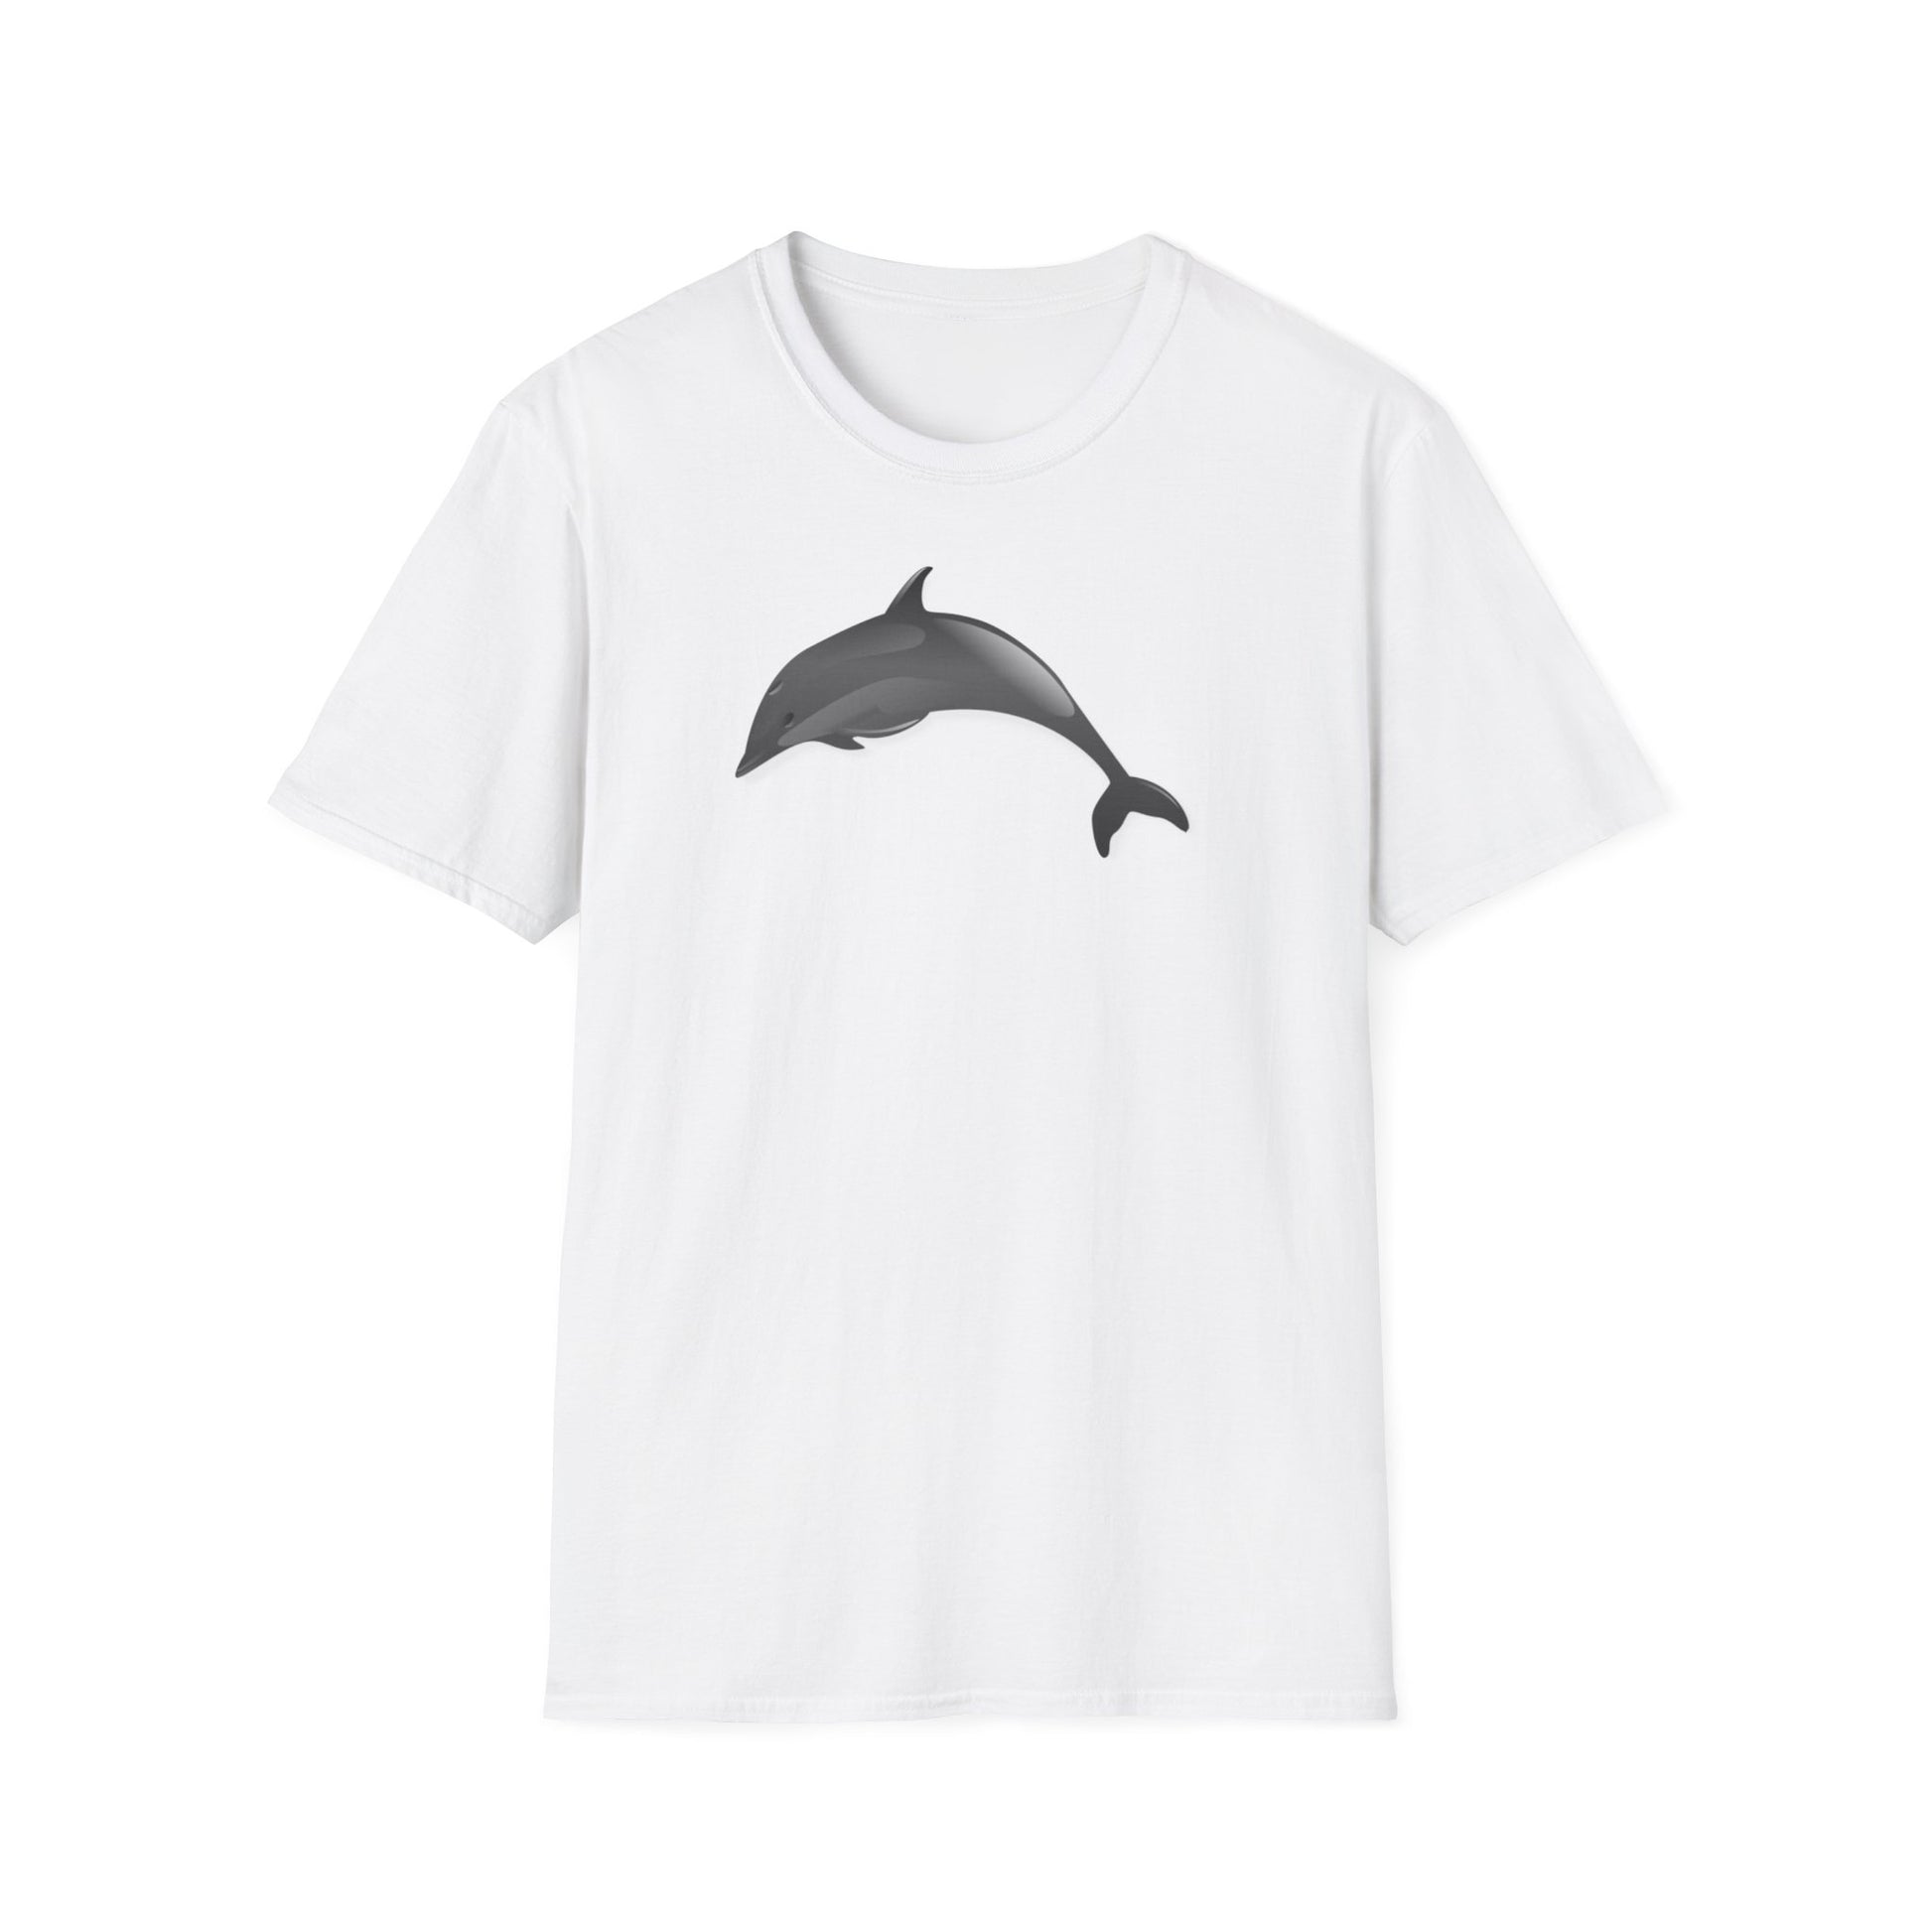 A white t-shirt with a design of a grey dolphin